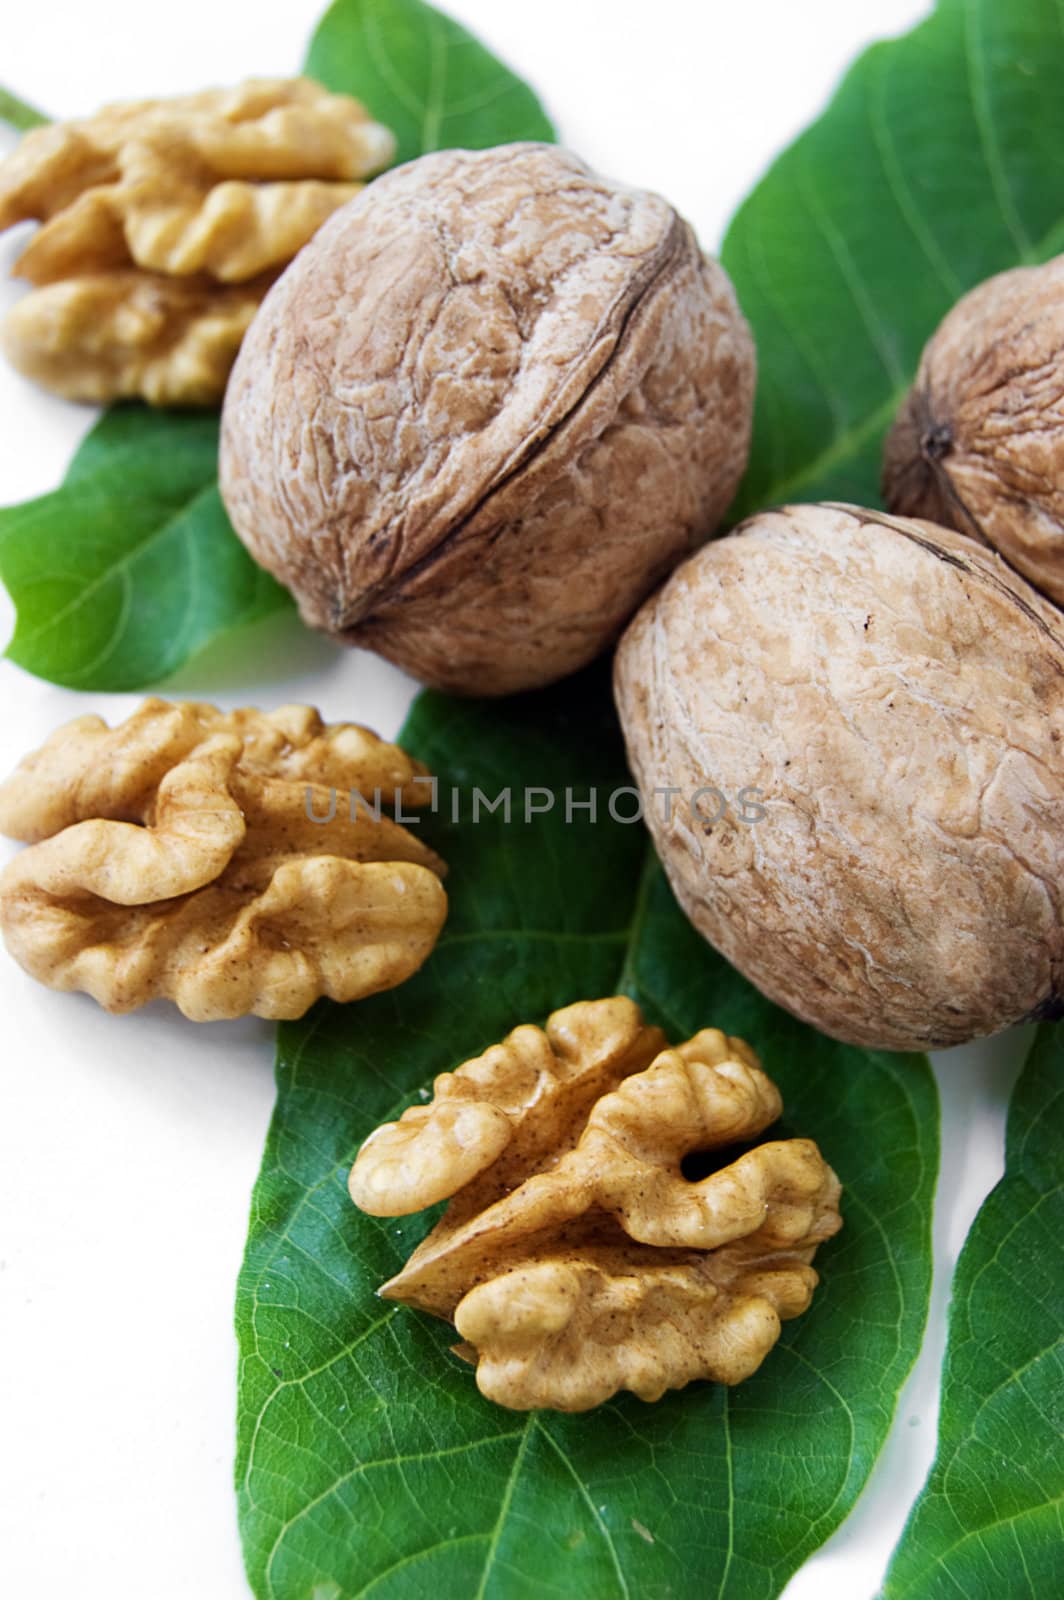 Walnut kernel and green leaves over white